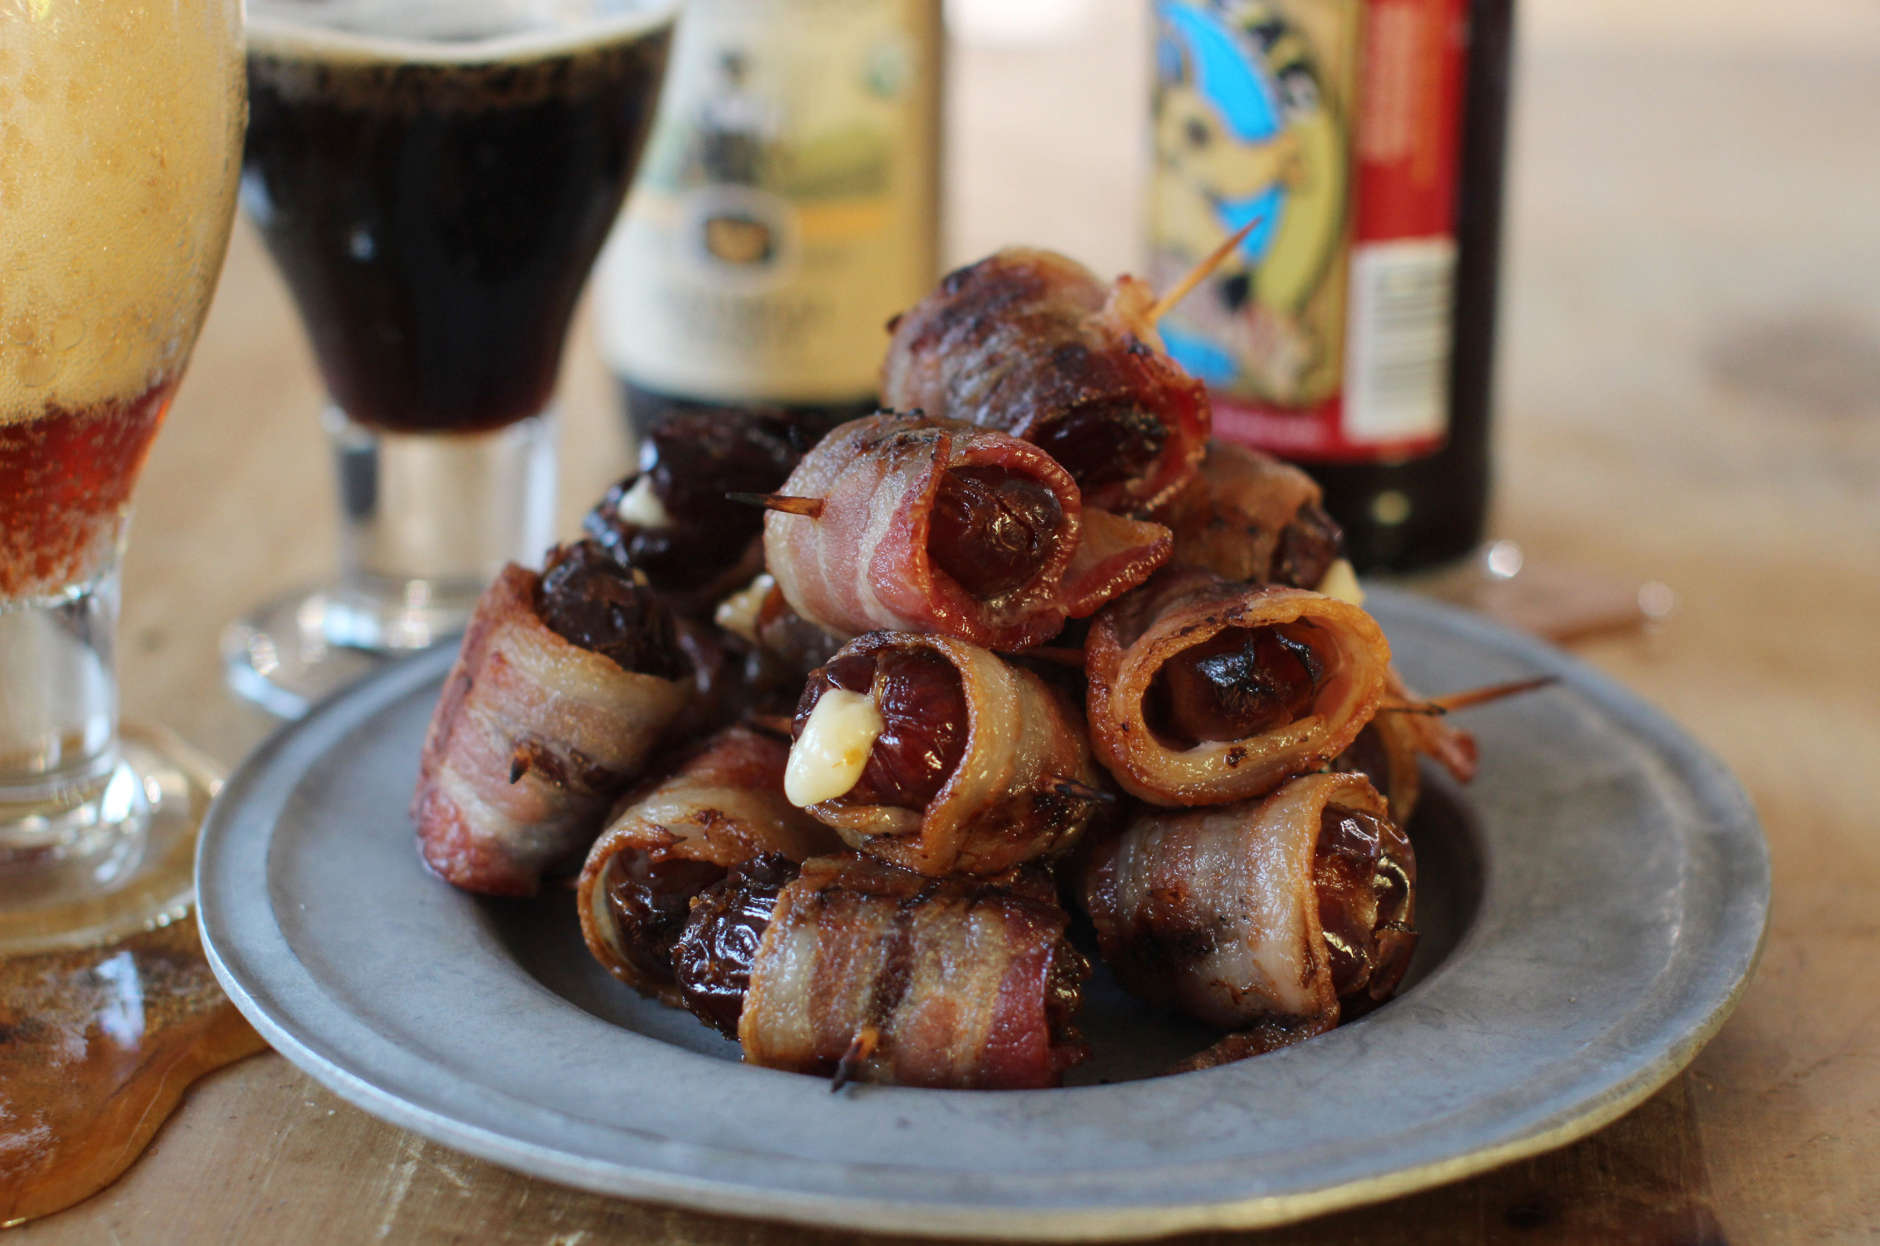 This Nov. 2, 2015 photo shows bacon wrapped Parmesan stuffed dates in Concord, N.H. The dates are easy to make, and even easier to eat. (AP Photo/Matthew Mead)